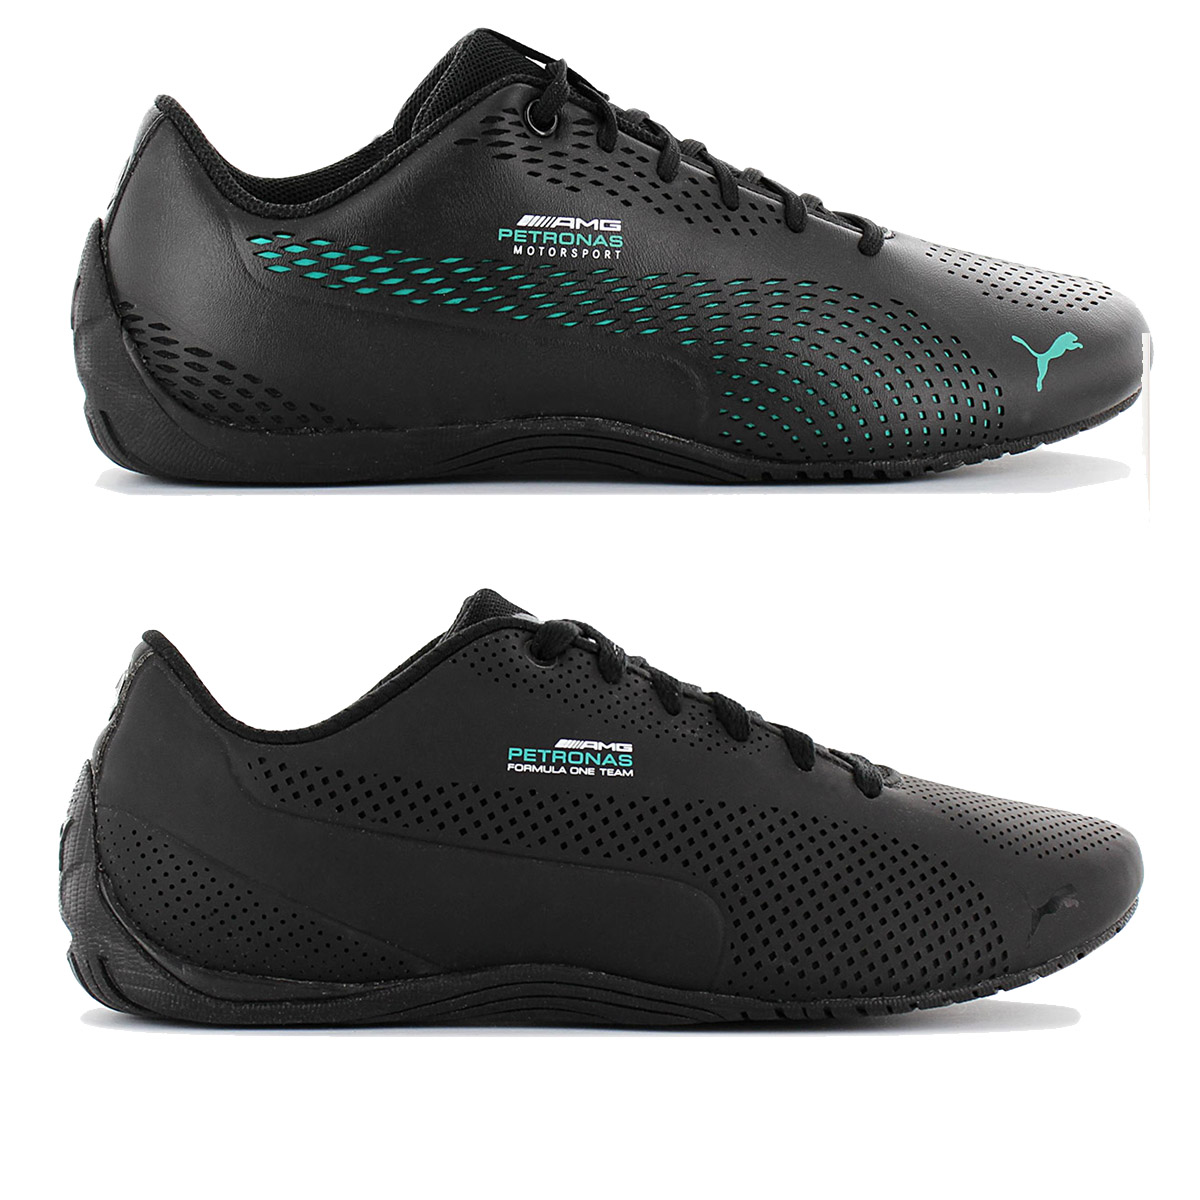 Parity > amg petronas motorsport shoes, Up to 62% OFF